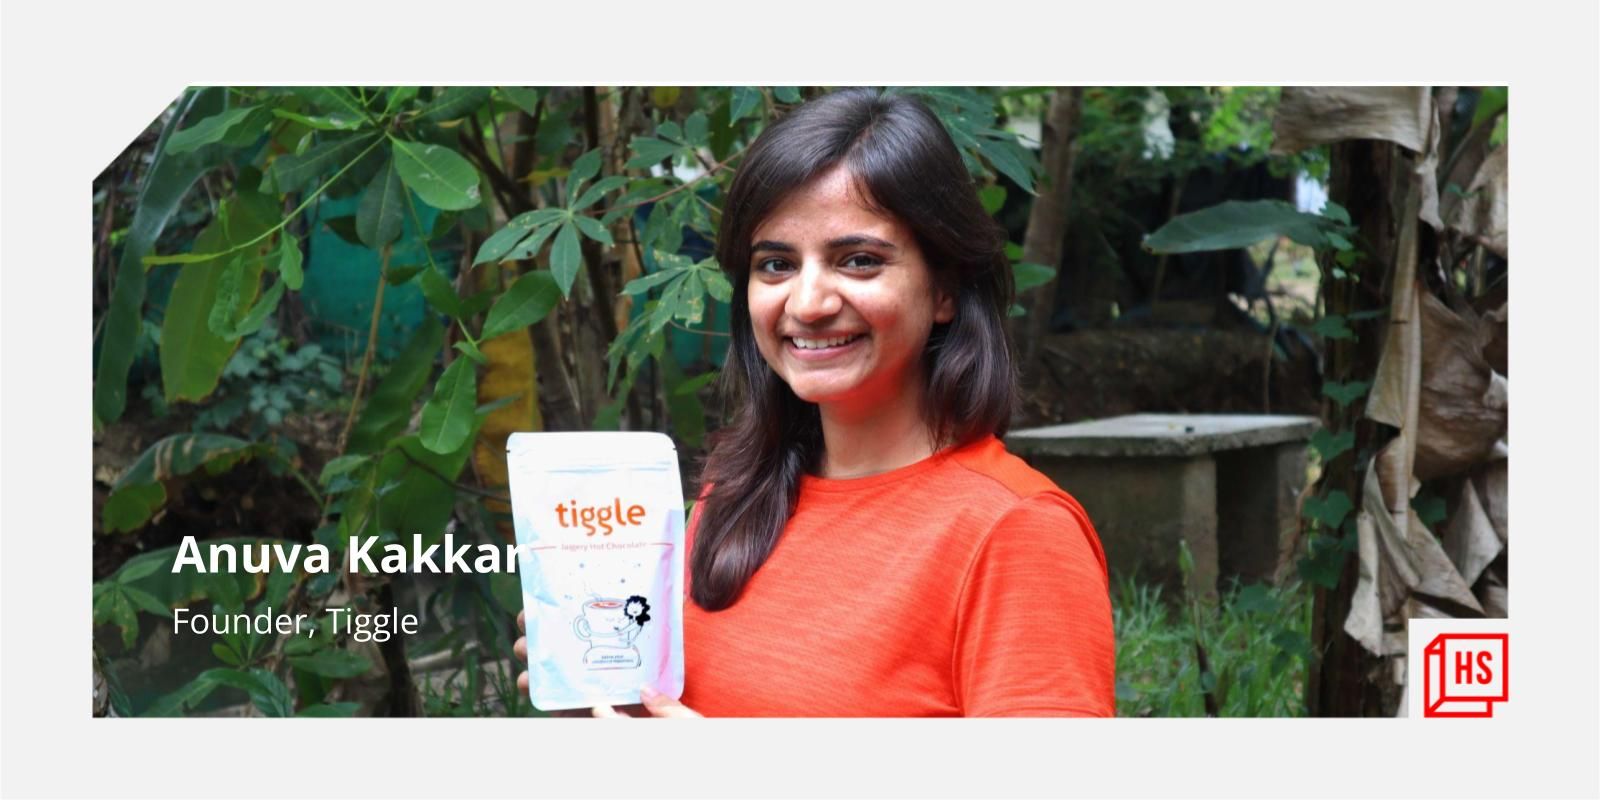 From one cup to 200k cups: How this 23-year-old grew India’s first hot chocolate brand amid the lockdown
